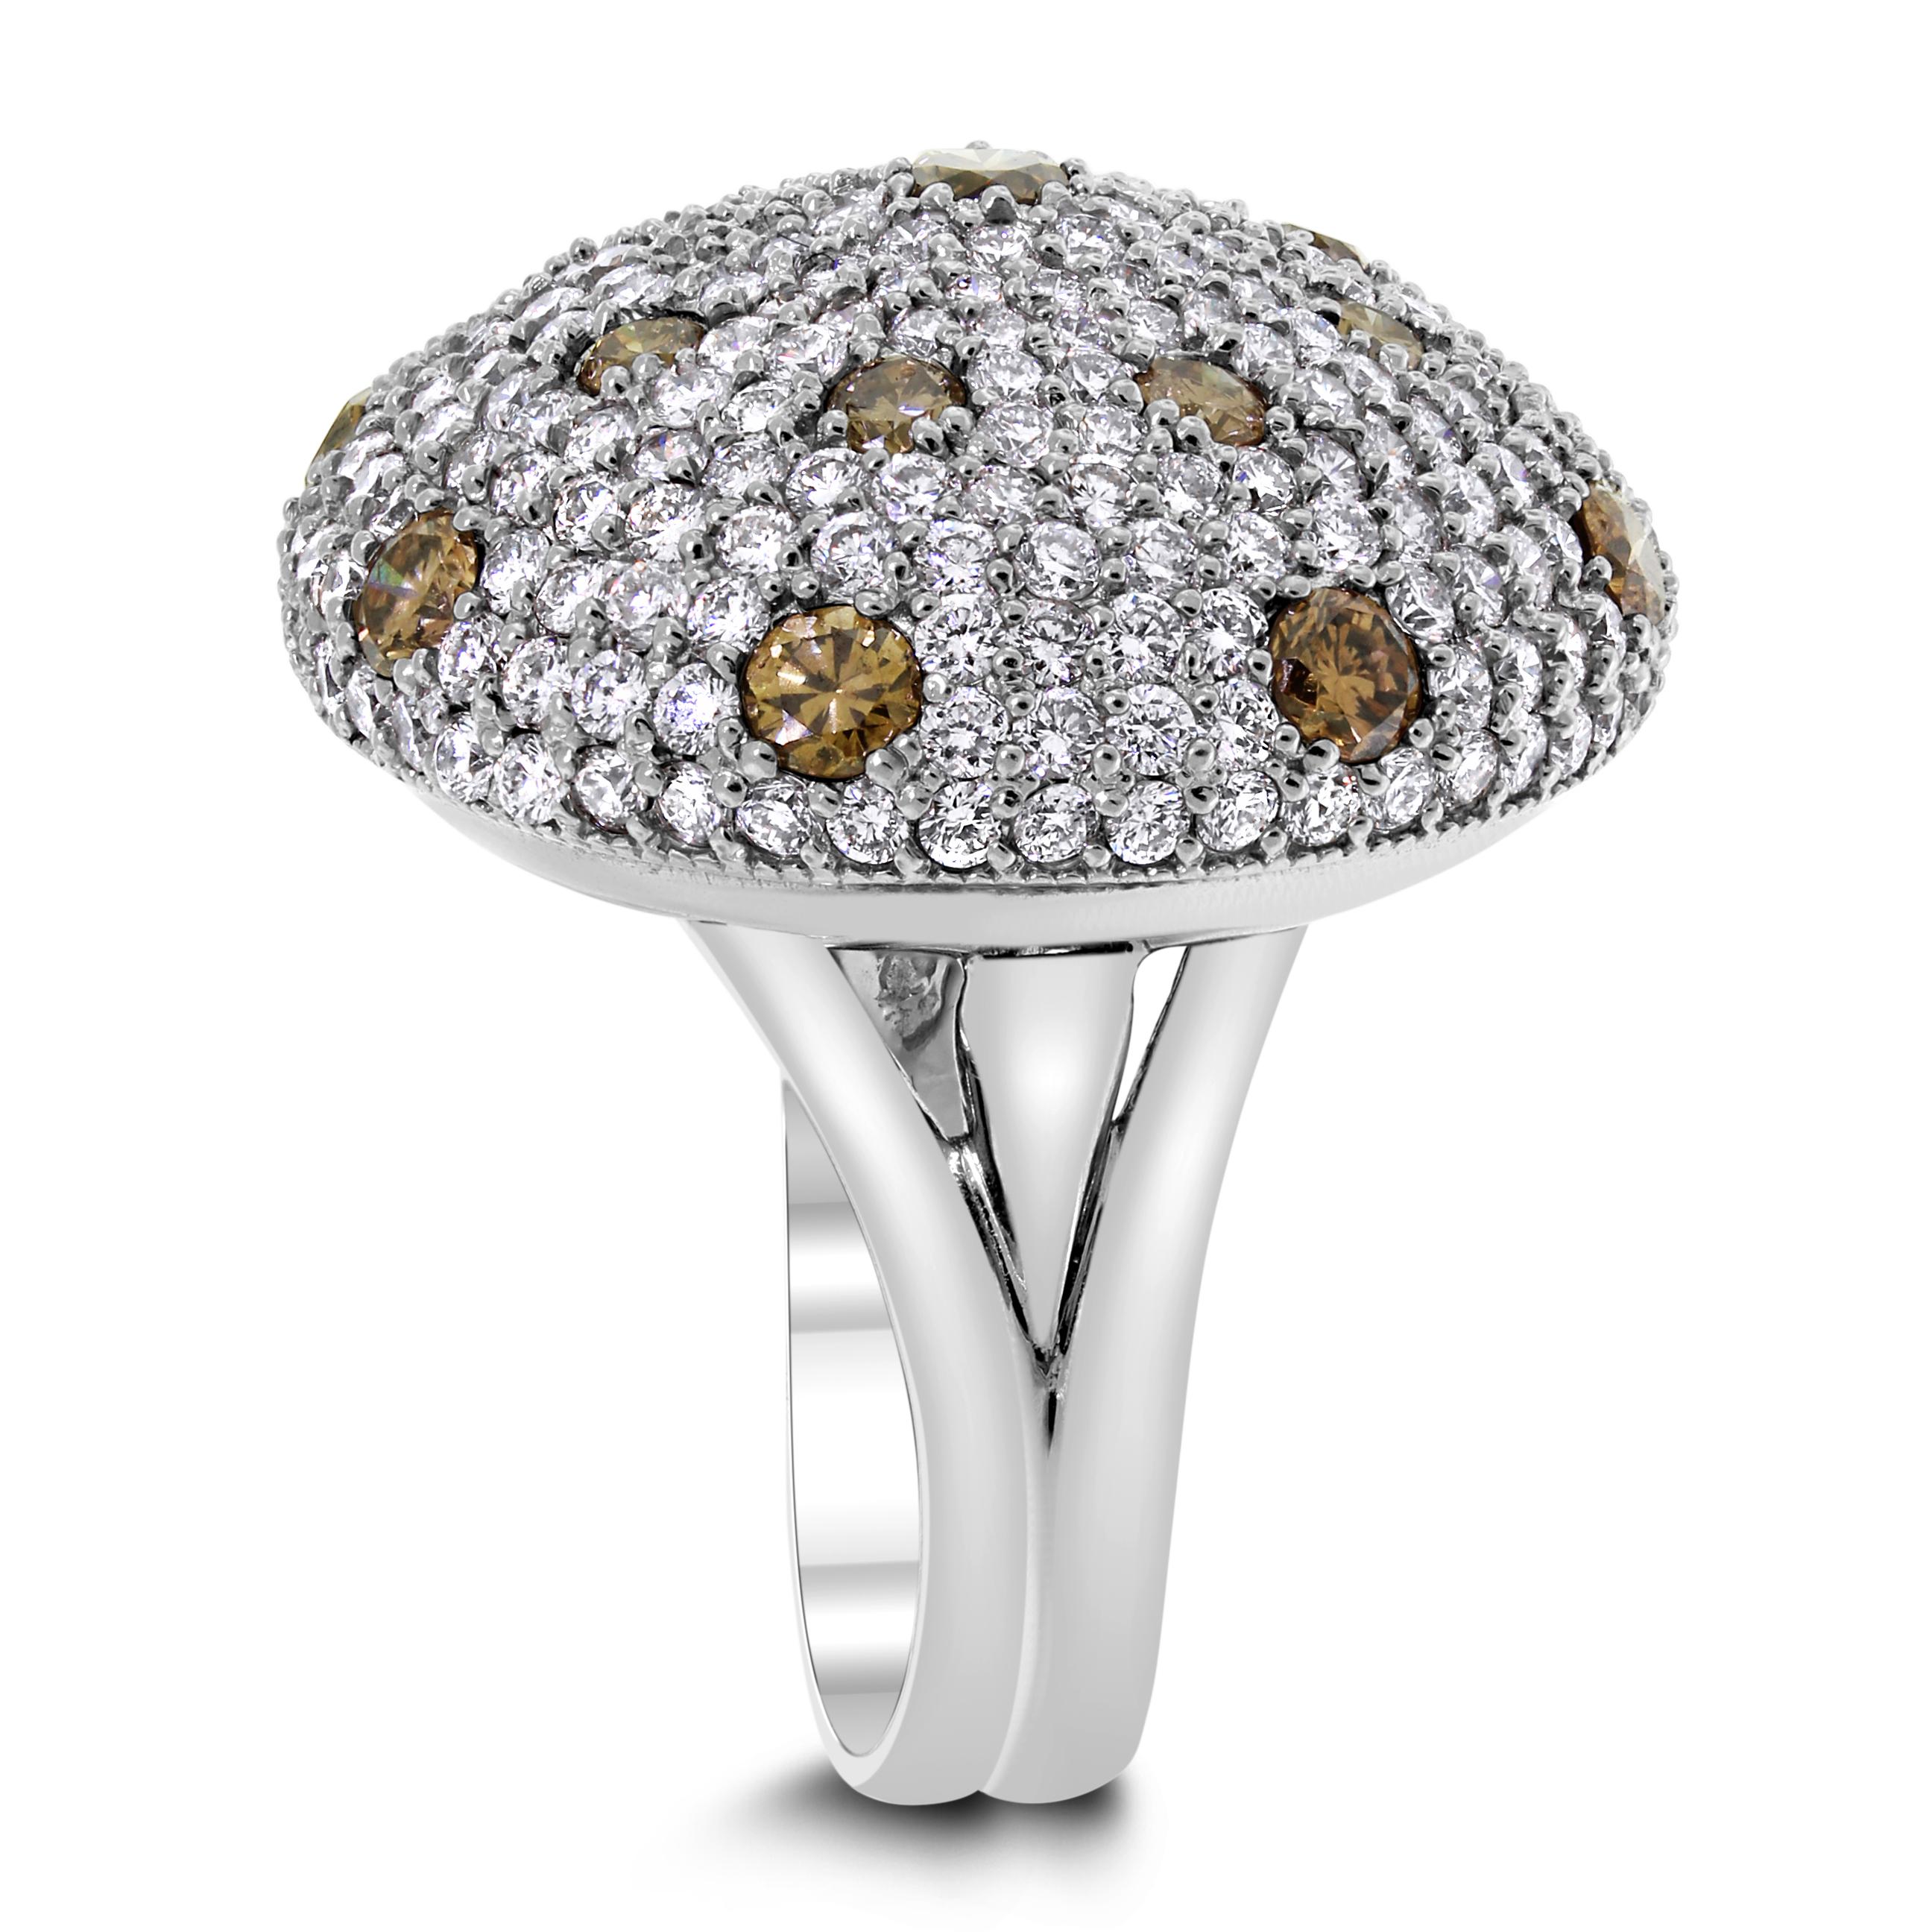 With pave set white and chocolate brown Diamonds, this ring sassily emulates a mushroom and is a dazzling statement piece.

Total Diamond Weight: 5.75 ct 
Diamond Shape: Round 
Diamond Color: F - G & Fancy Brown 
Diamond Clarity: VS (Very Slightly